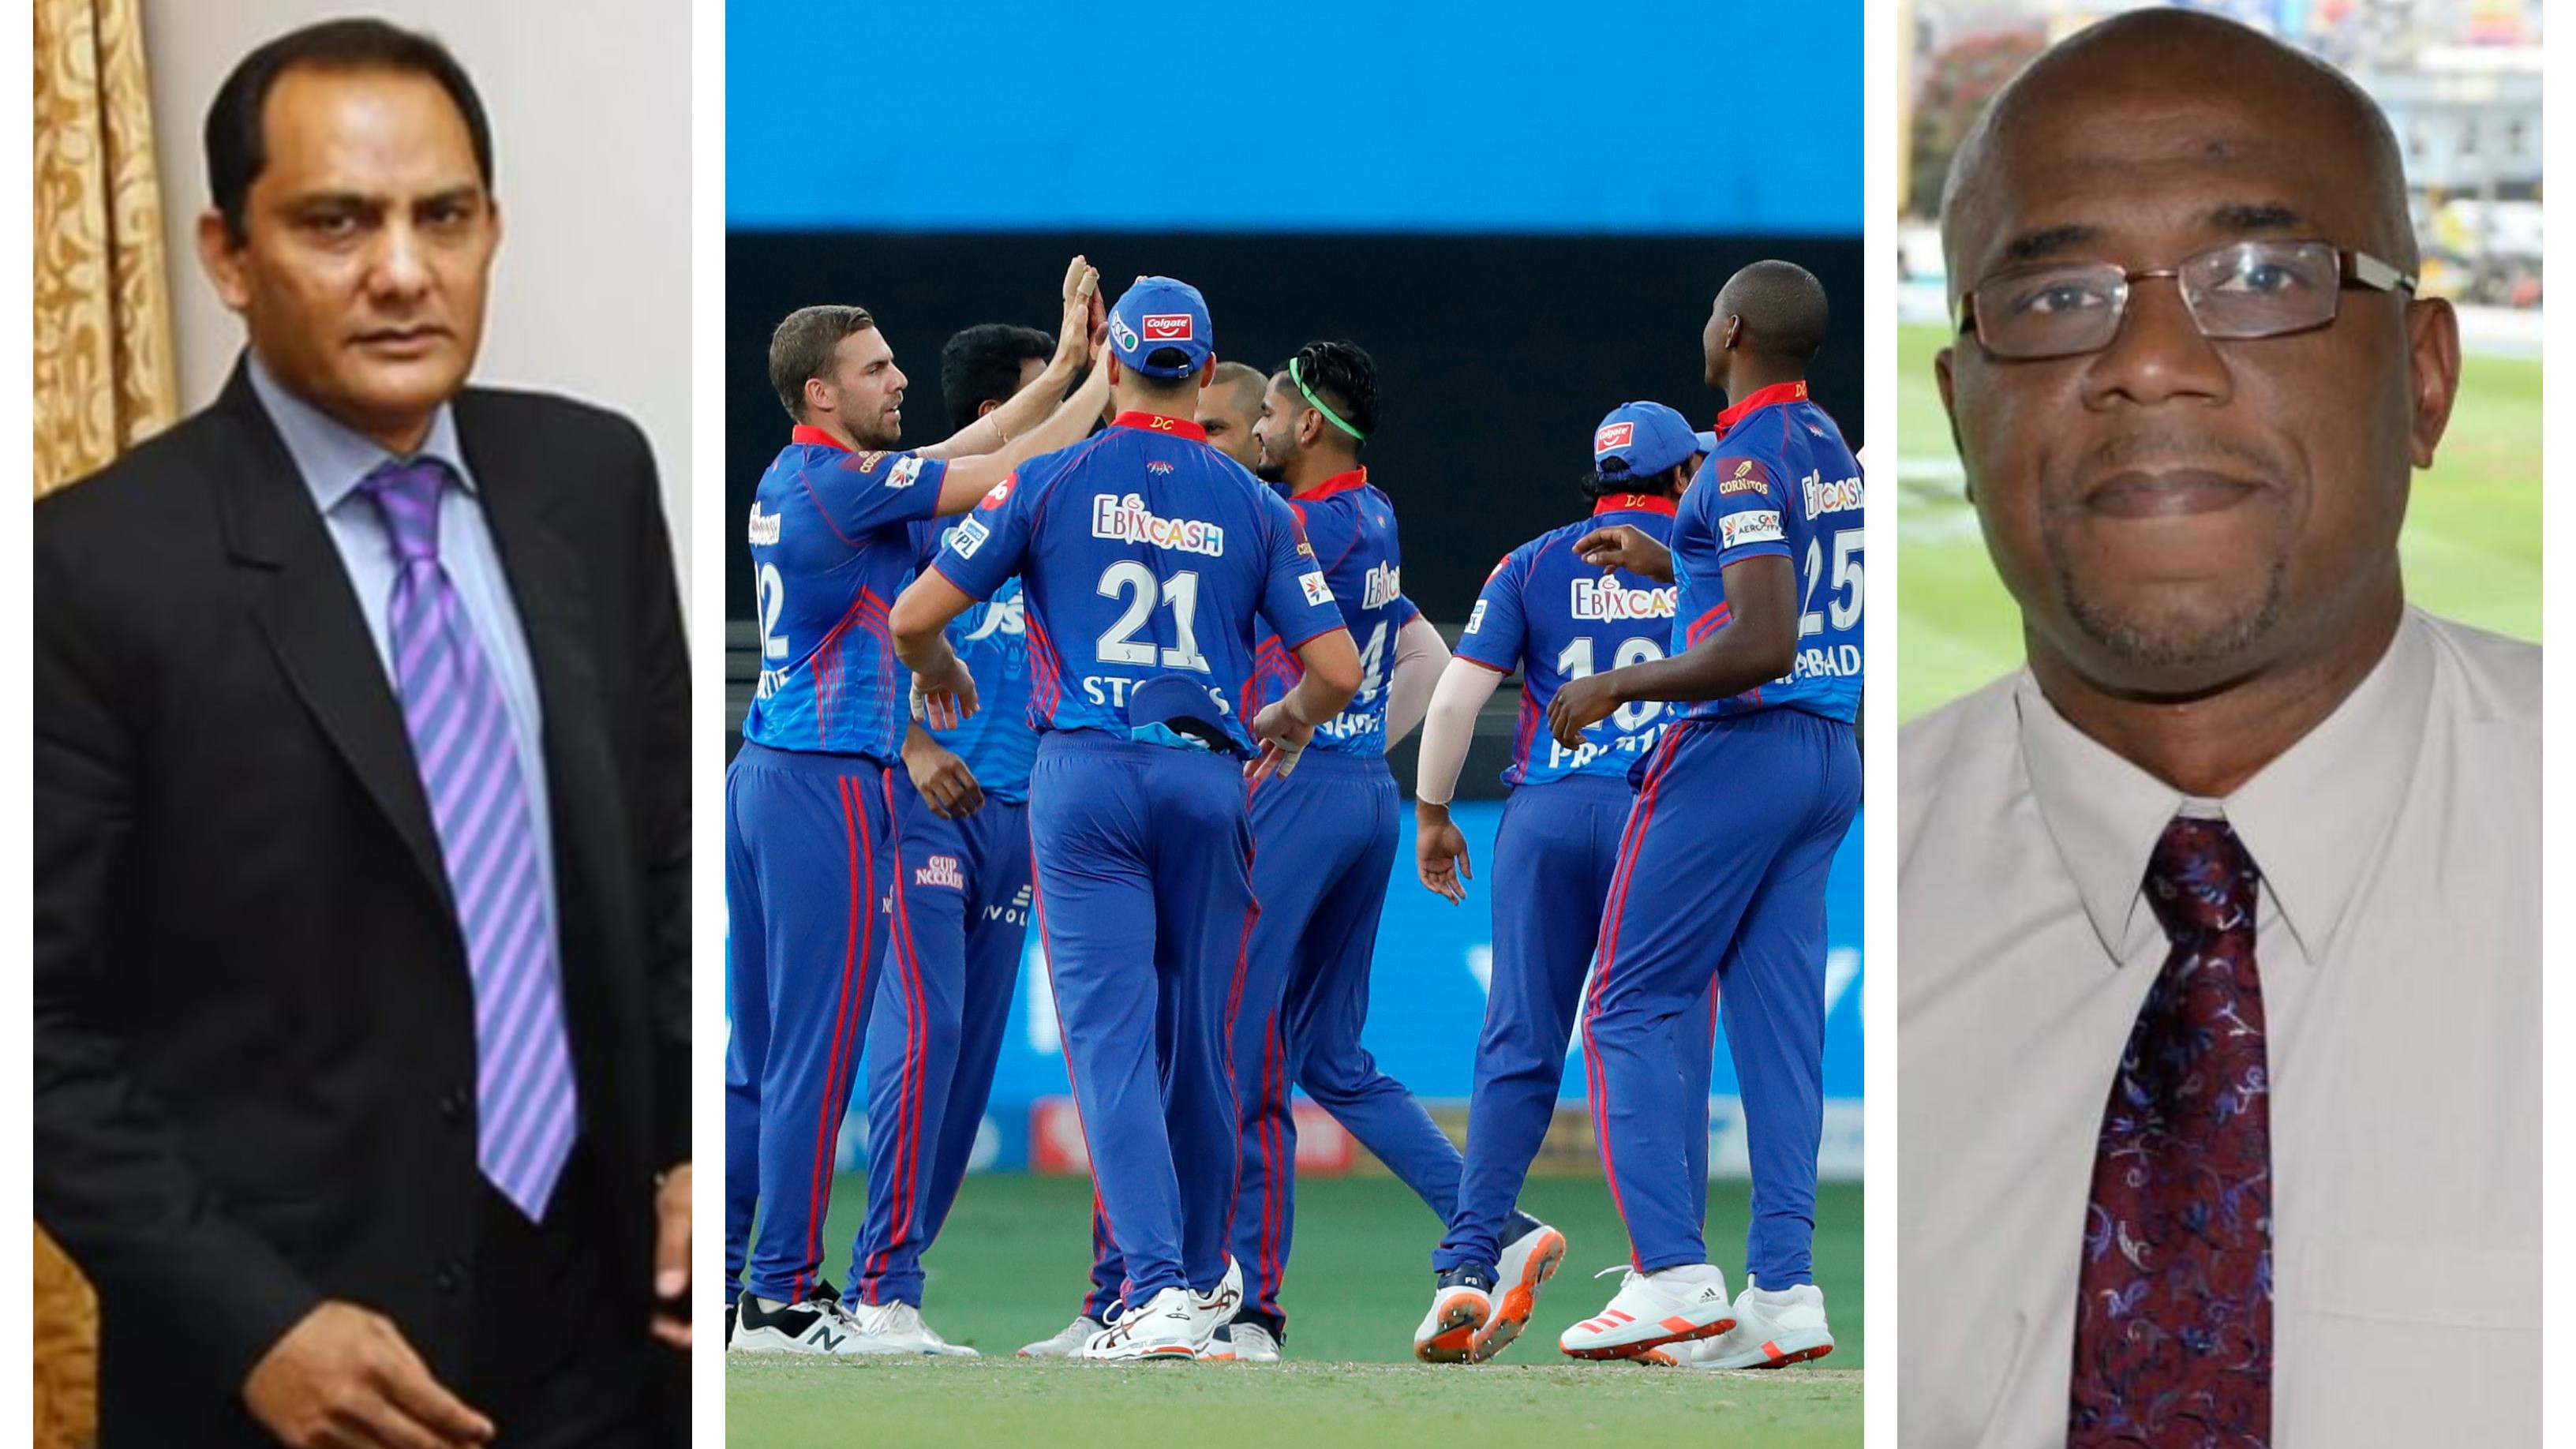 IPL 2021: Cricket fraternity reacts to Delhi Capitals’ clinical outing against Sunrisers Hyderabad